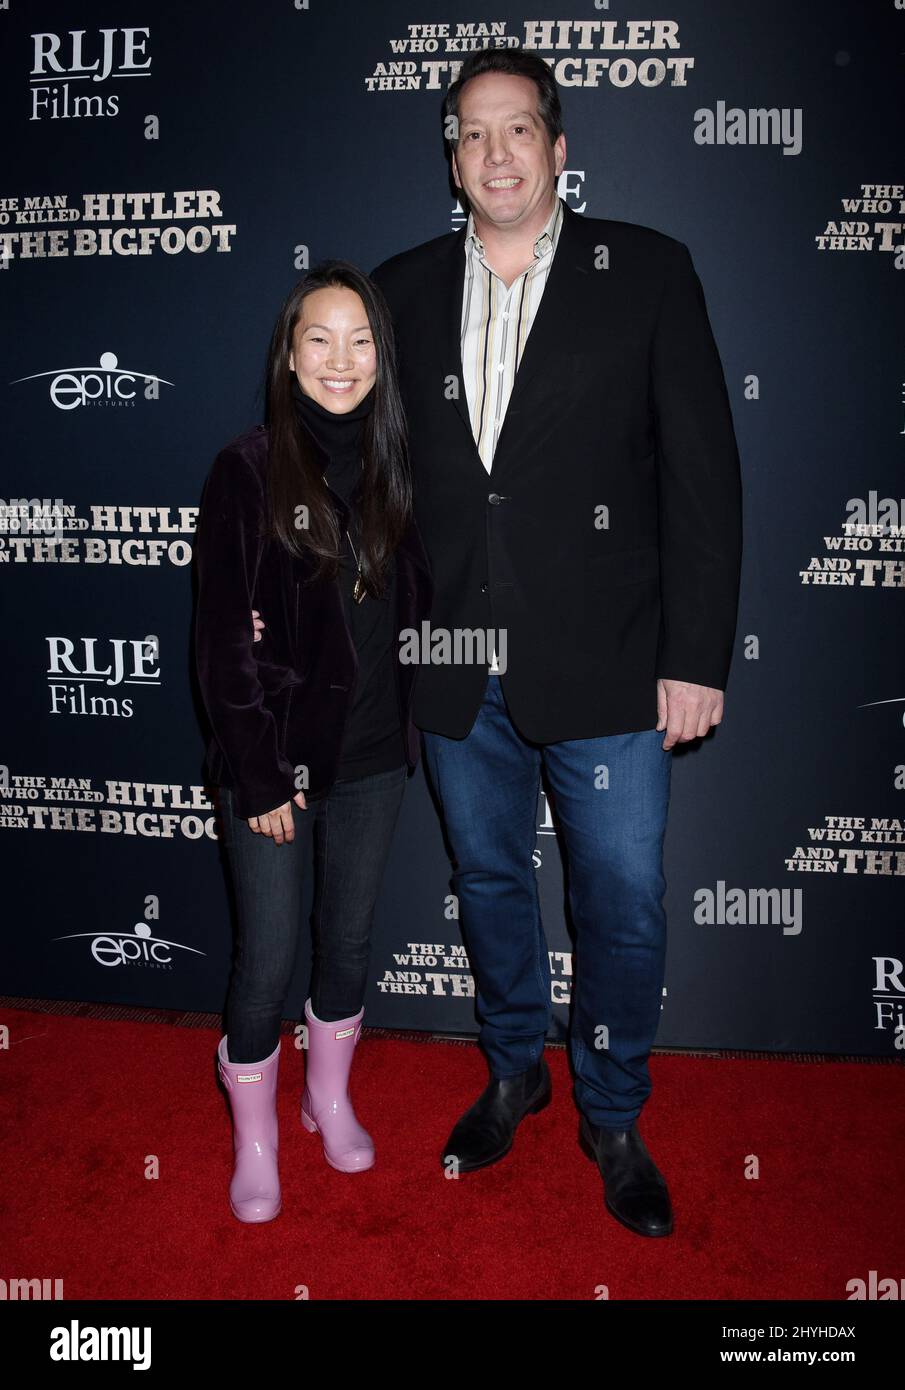 Patrick Ewald und Sarah Gilliland bei der Los Angeles Premiere „The man Who Killed Hitler and Then The Bigfoot“, die am 4. Februar 2019 in Hollywood, ca. Stockfoto